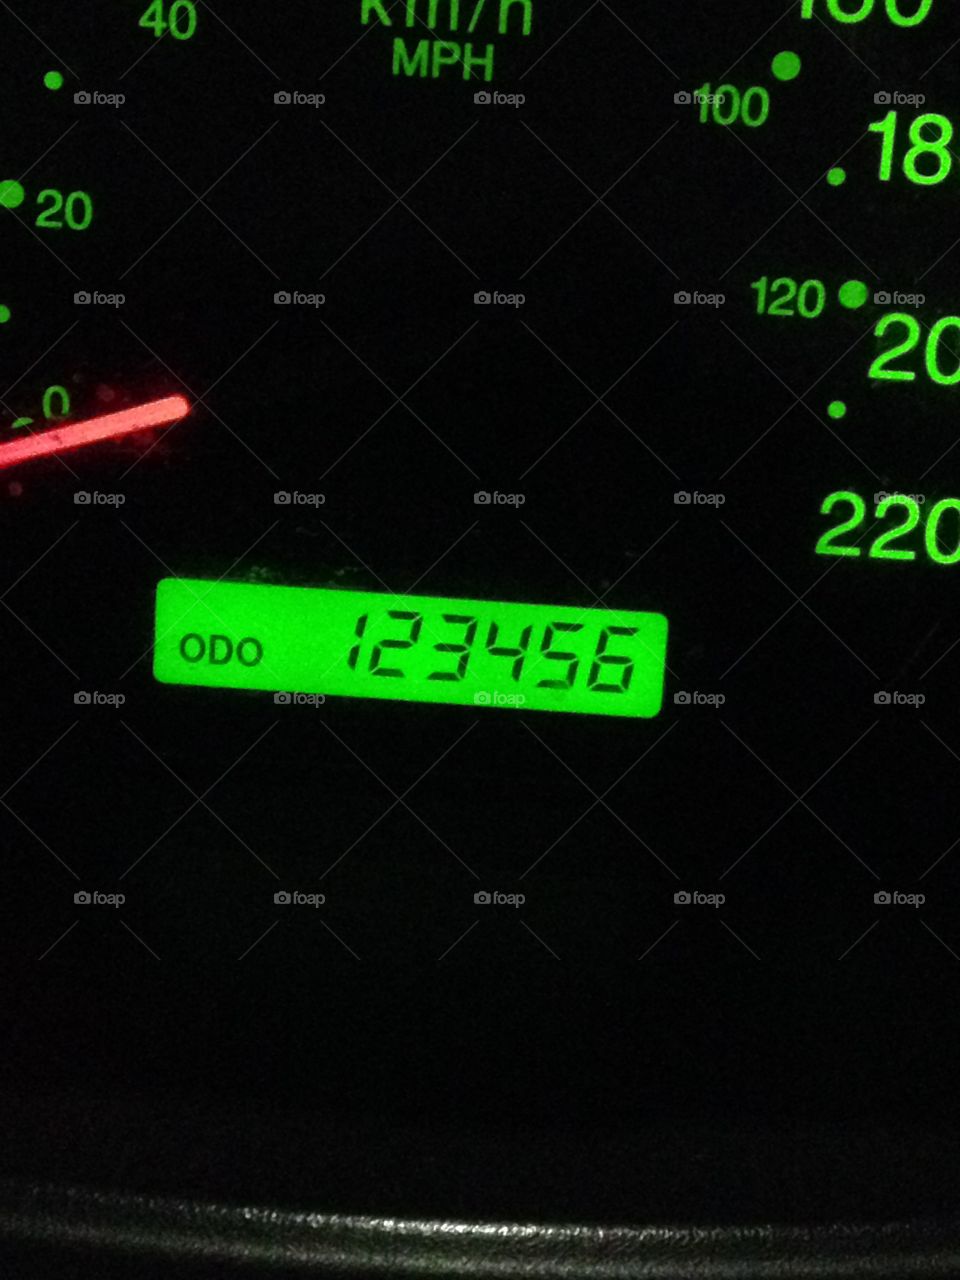 Untitled. I had to snap a pic when my cars odometer reading turned to this!